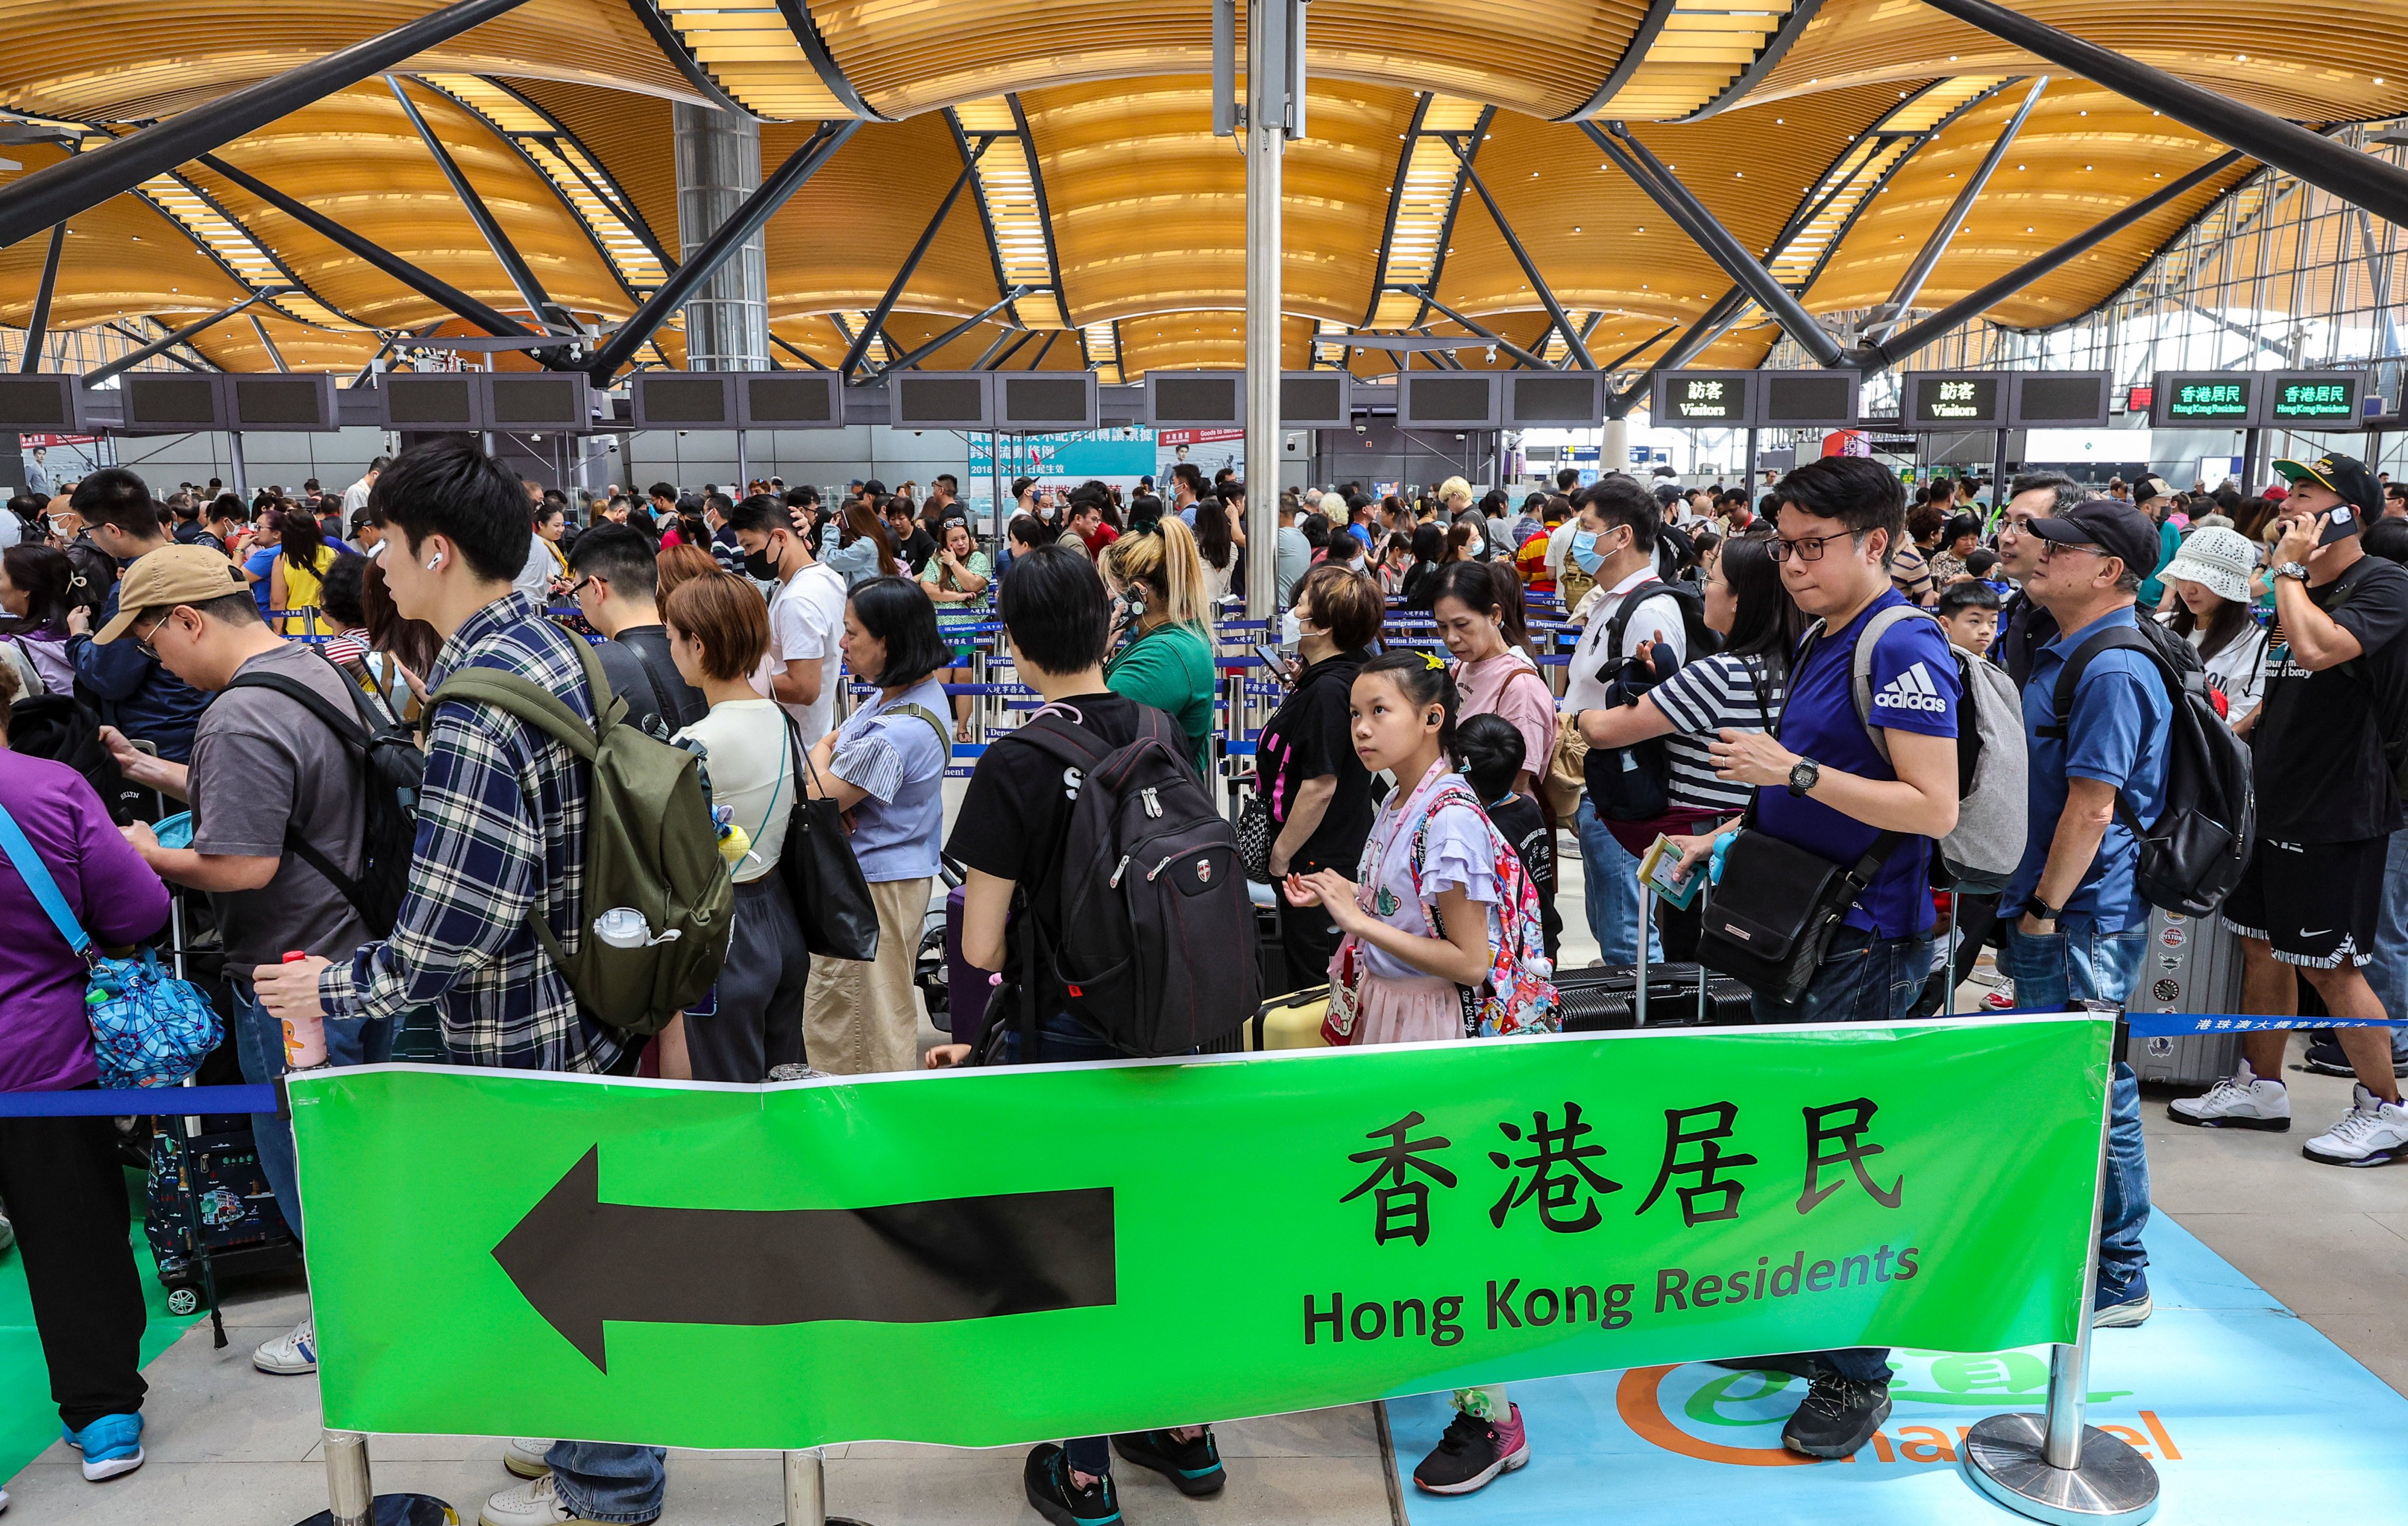 A lawmaker has said the scheme can encourage more non-Chinese Hongkongers to visit the mainland. Photo: Edmond So